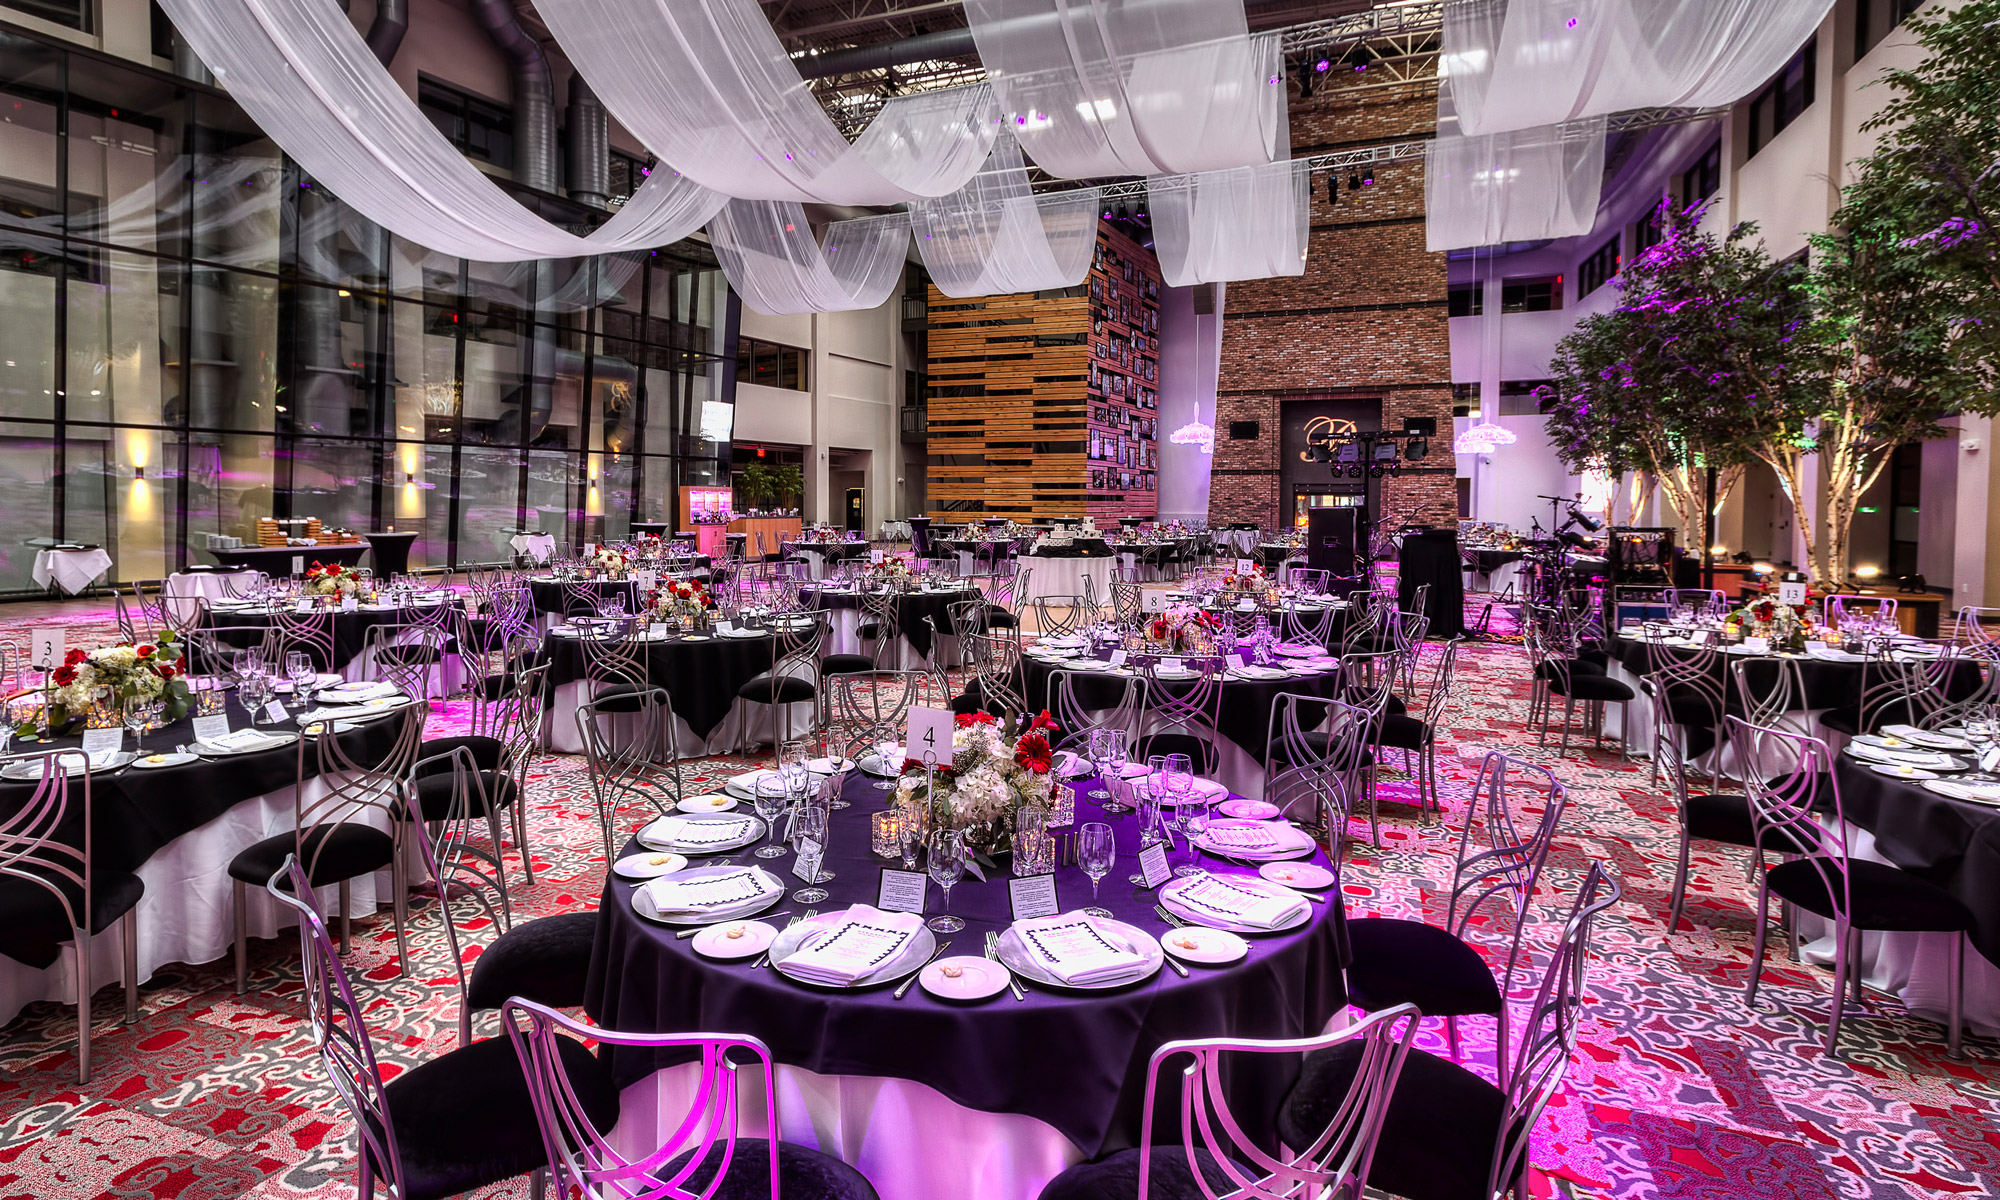 Rich’s Exclusive Venues are Some of WNY’s “Hidden Gems”